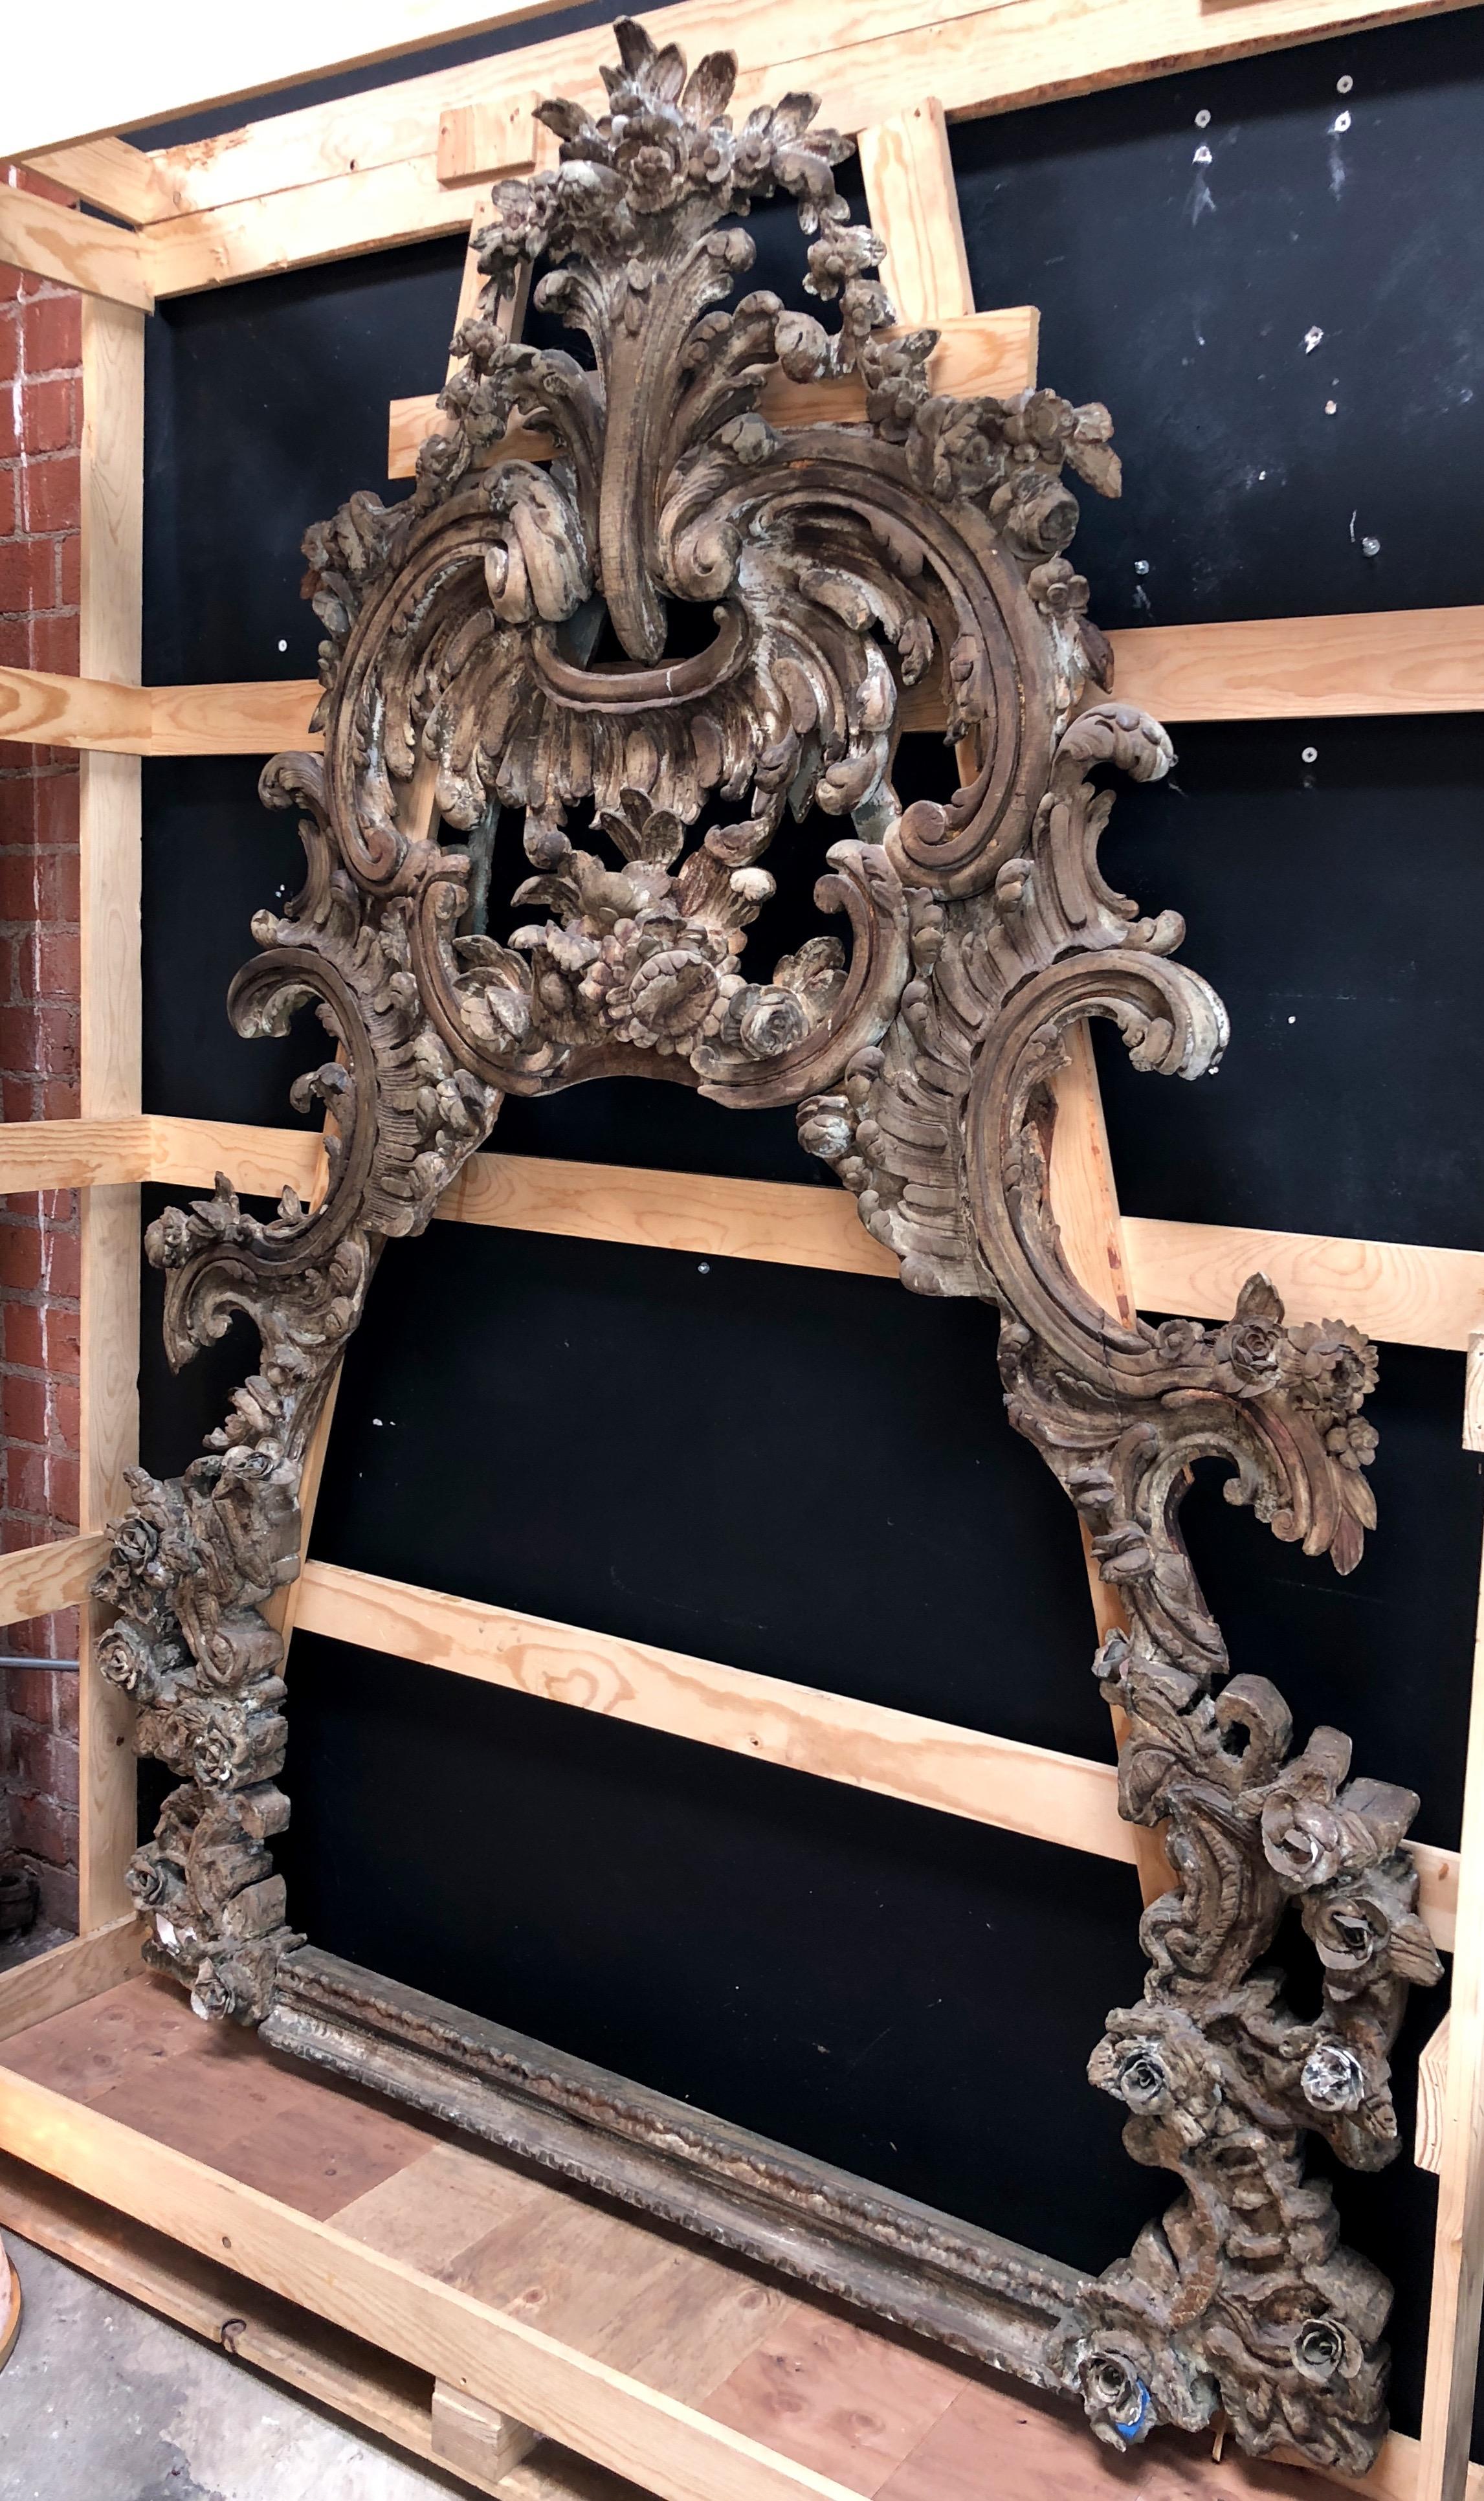 This beautiful antique frame is notable for its extremely fine hand-carved Baroque style detailing. 
Floral garlands and scrolling flowers imagery are common to Baroque design, as is the use of heavy textiles such as velvet and damask.